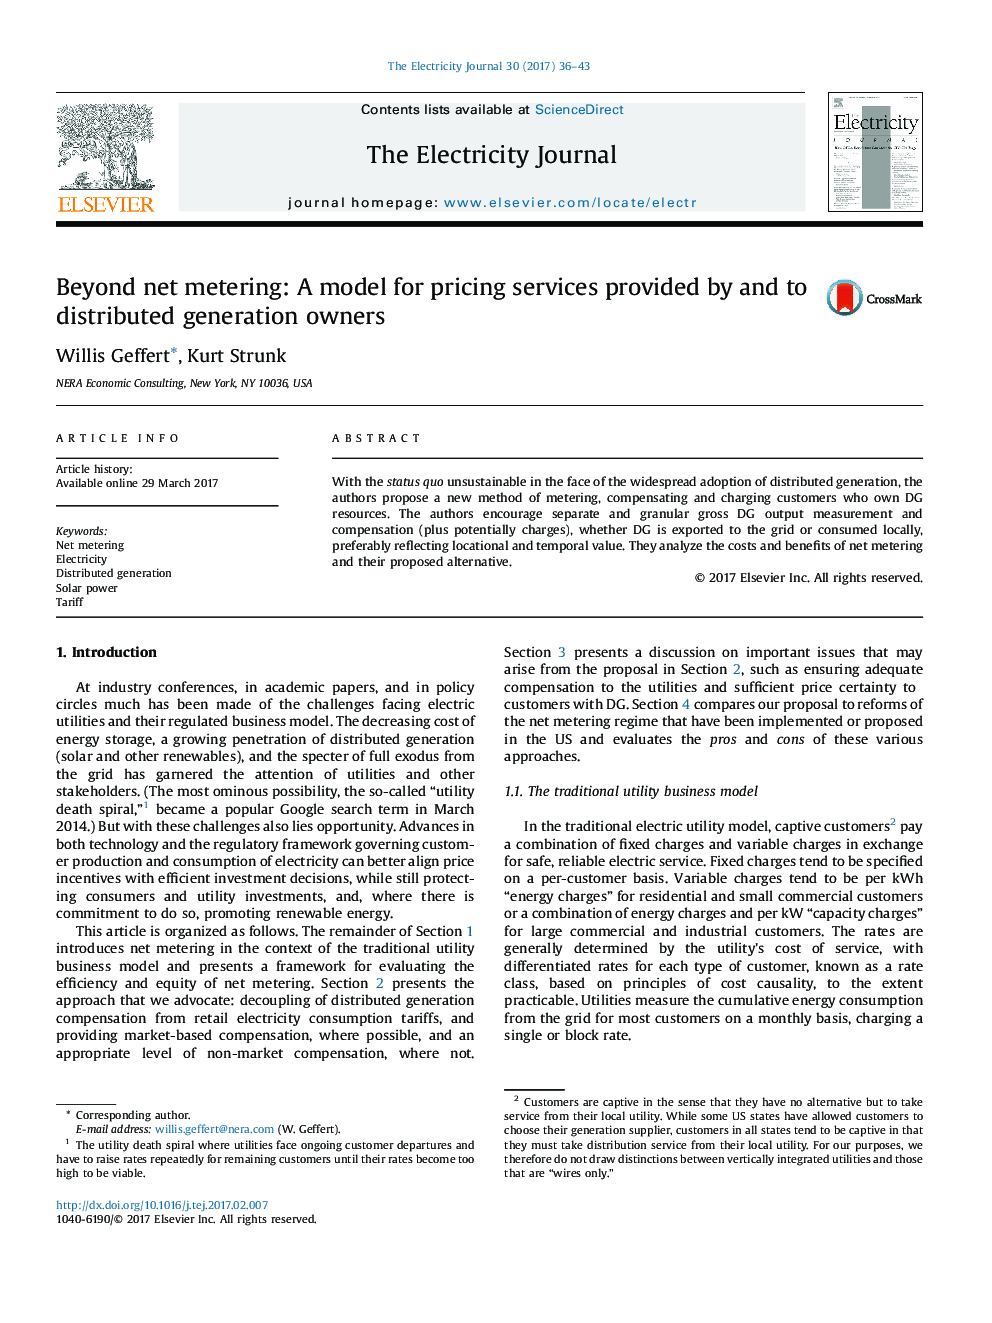 Beyond net metering: A model for pricing services provided by and to distributed generation owners